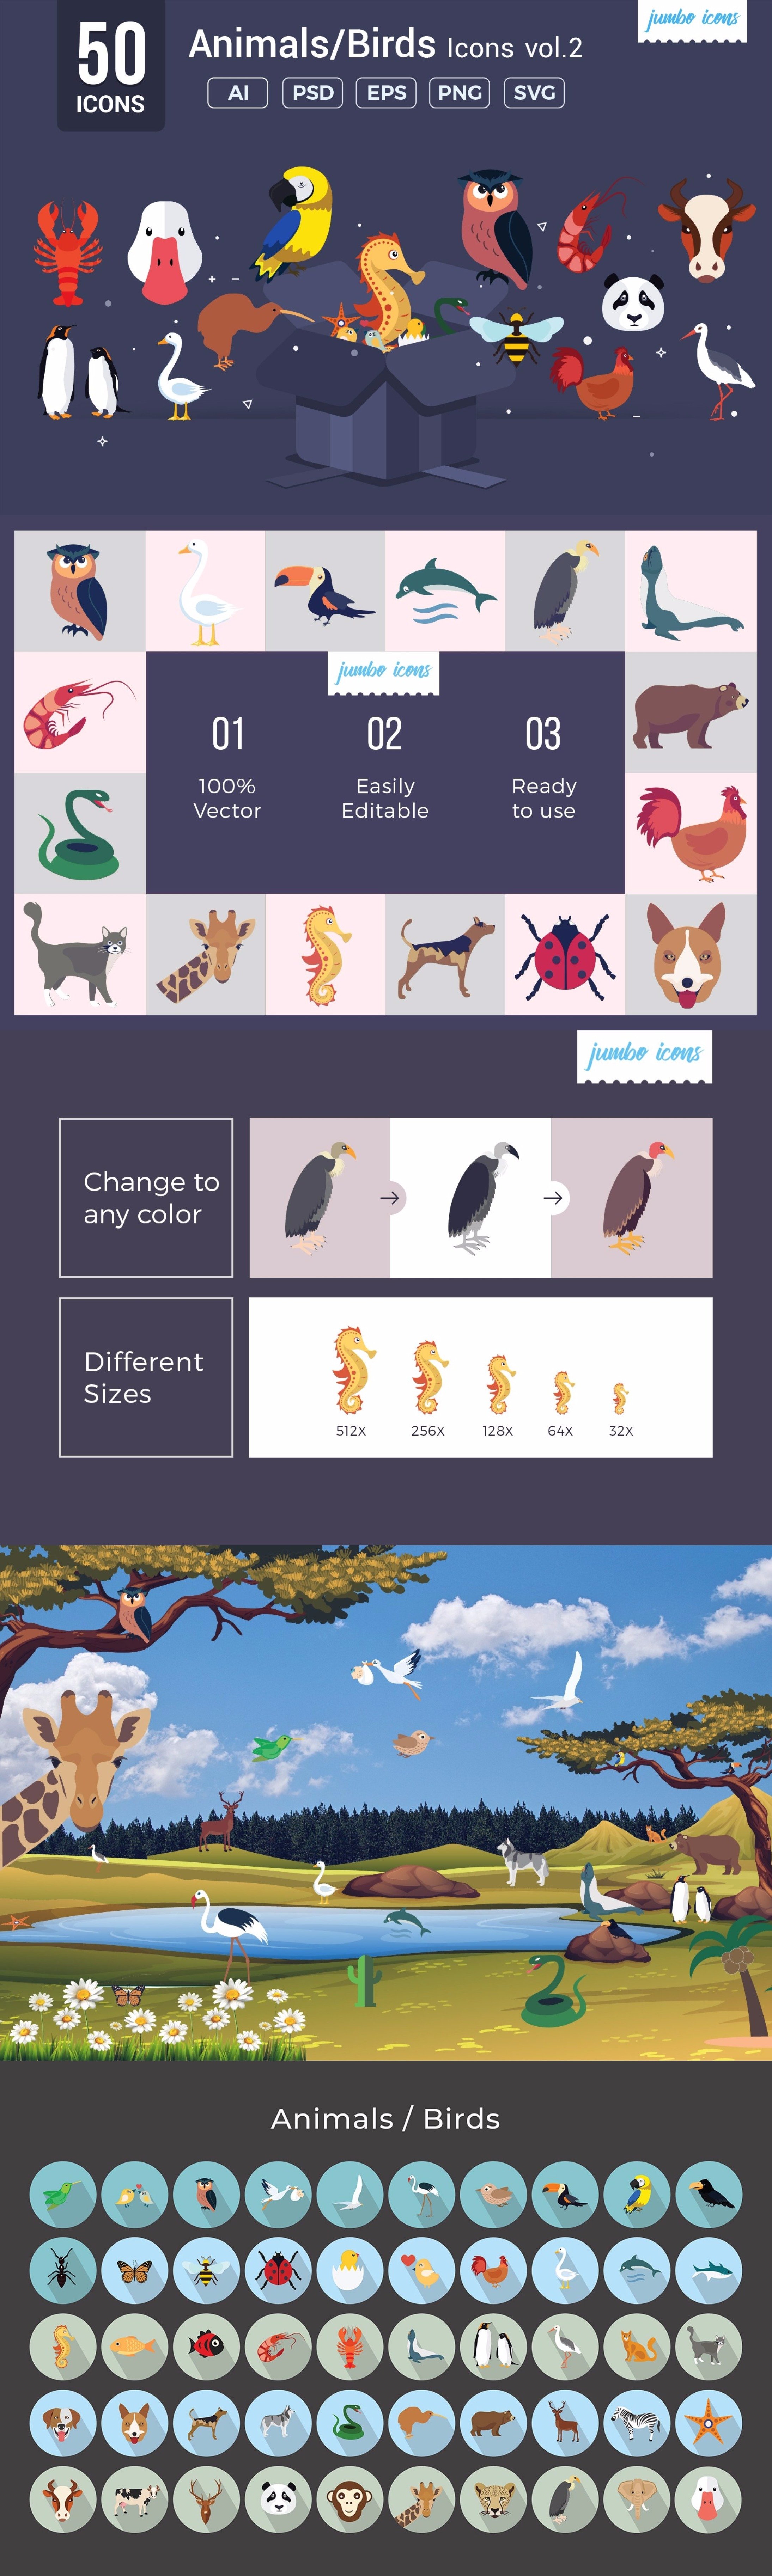 Animals - Birds Vector Icons V2 cover image.